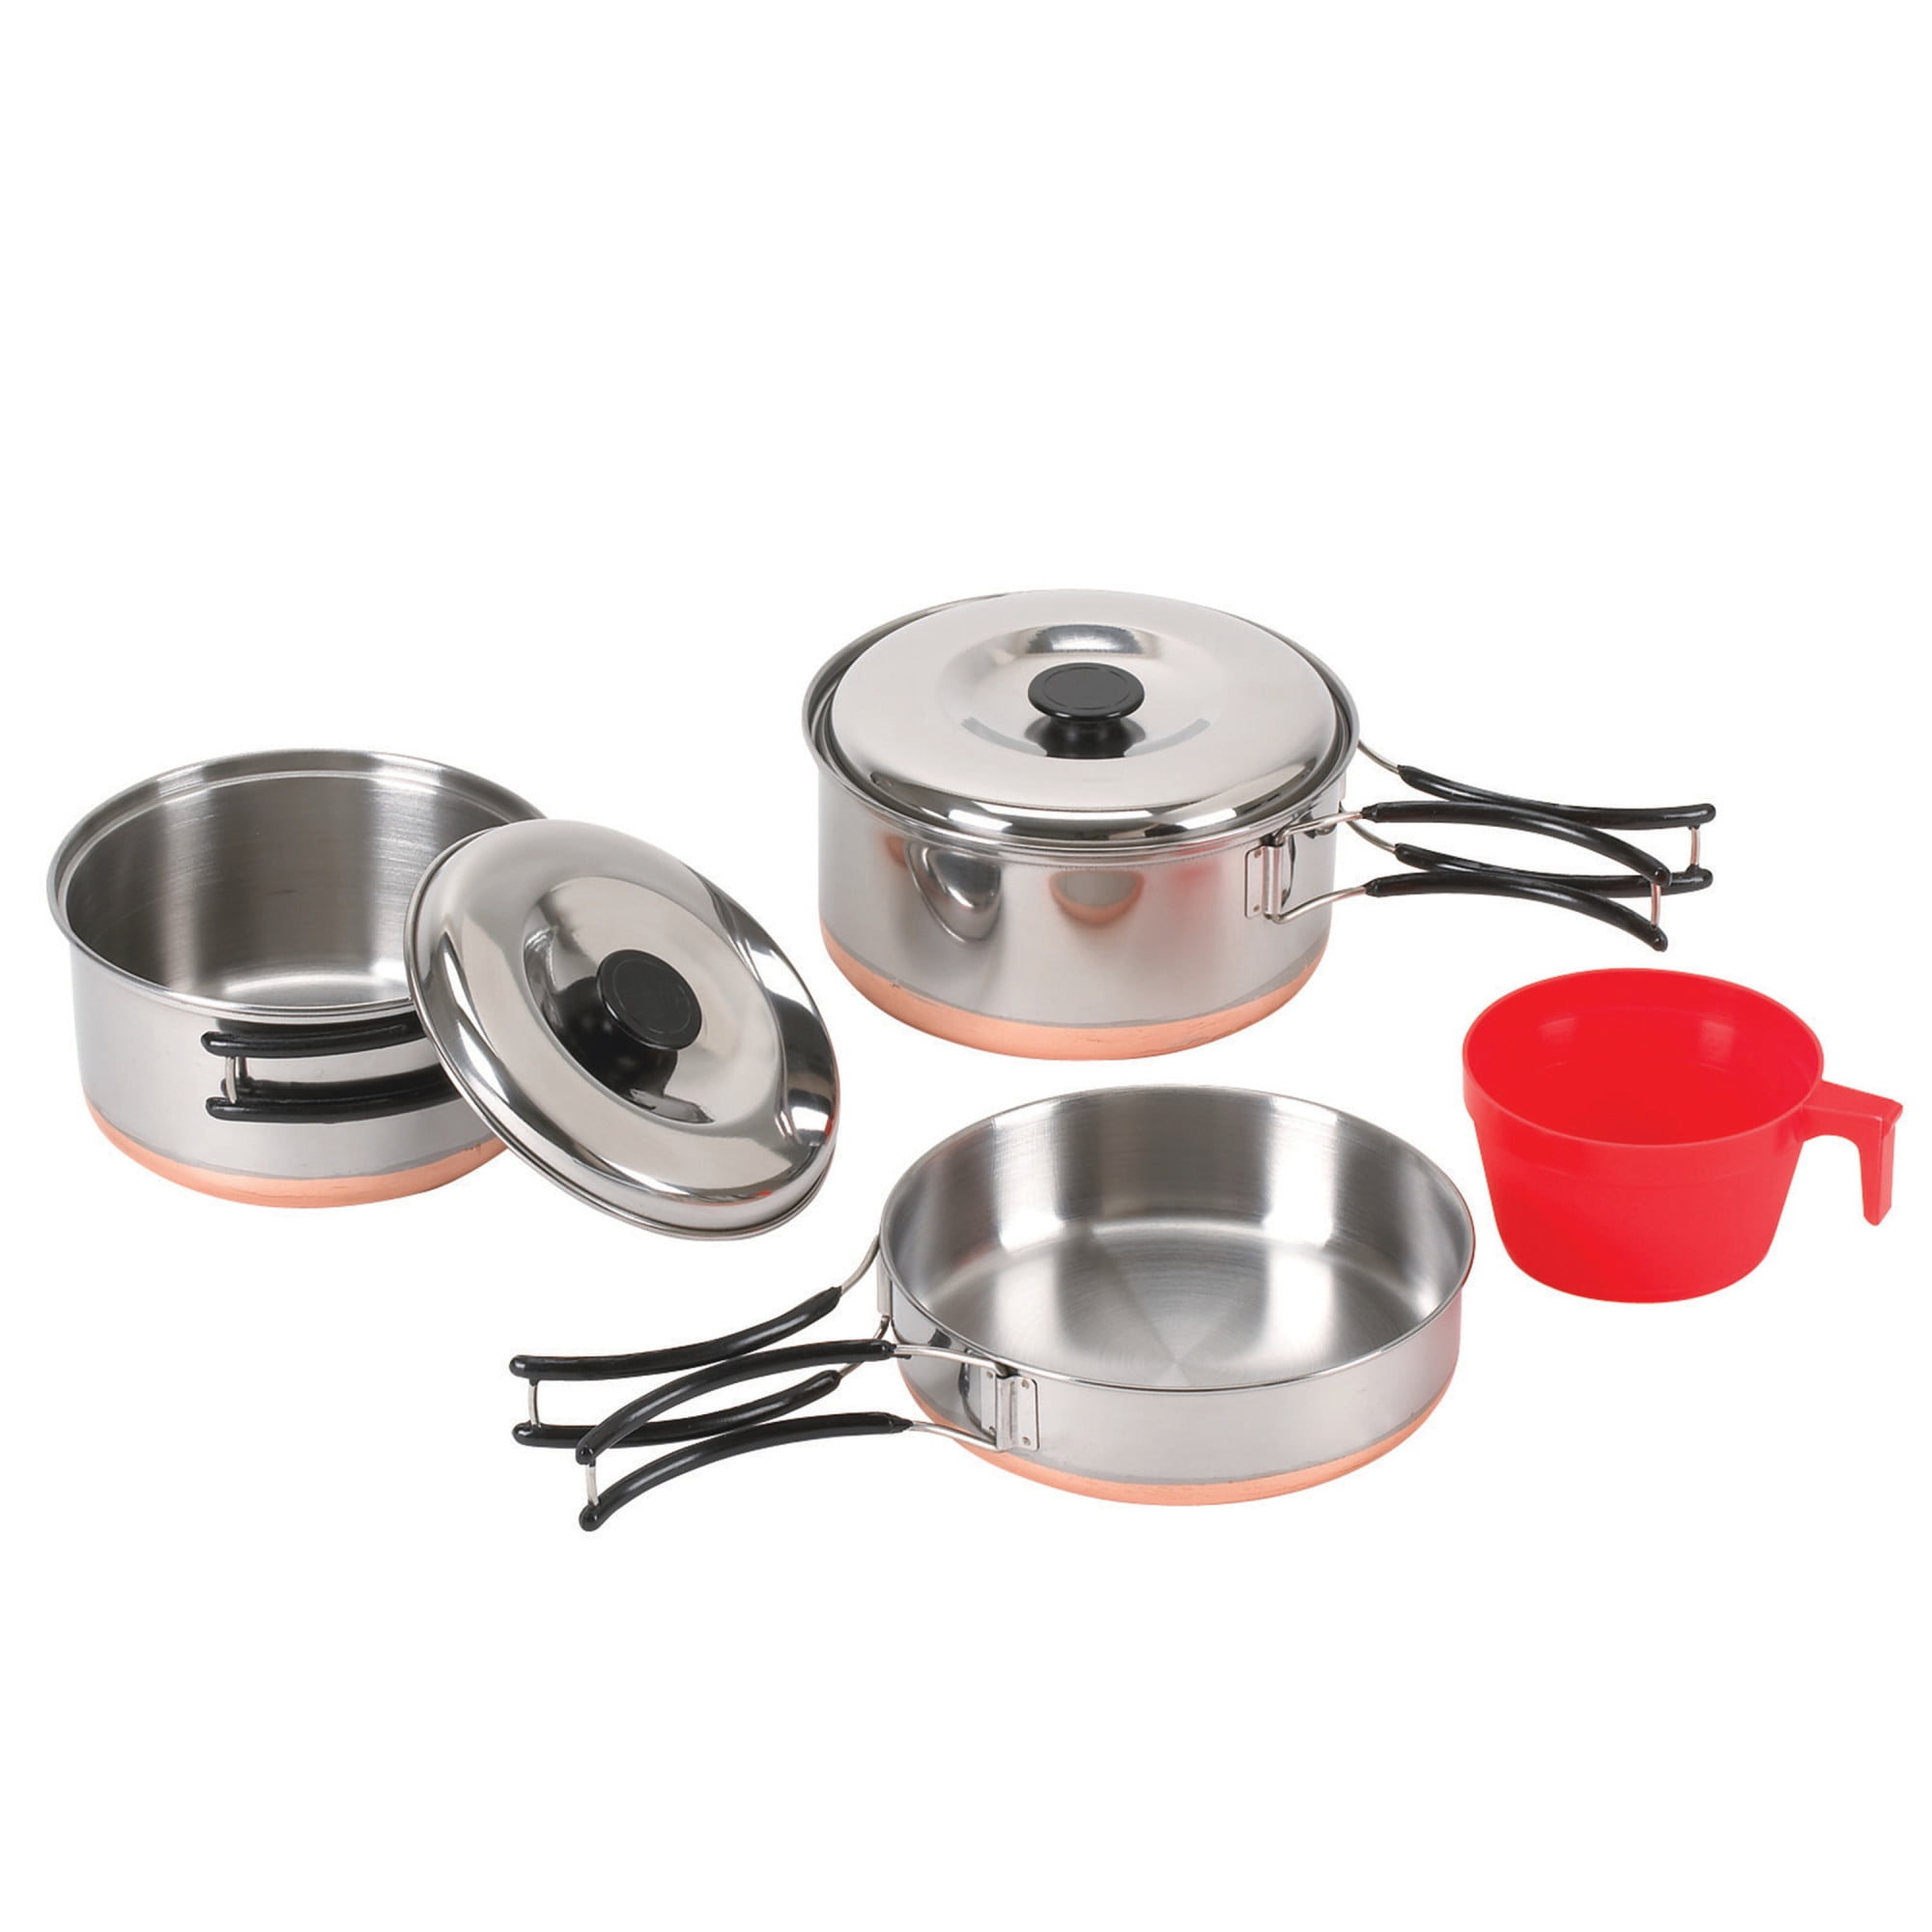 Stainless Steel Mess Kit for Camping,Backpacking & Outdoors Stansport